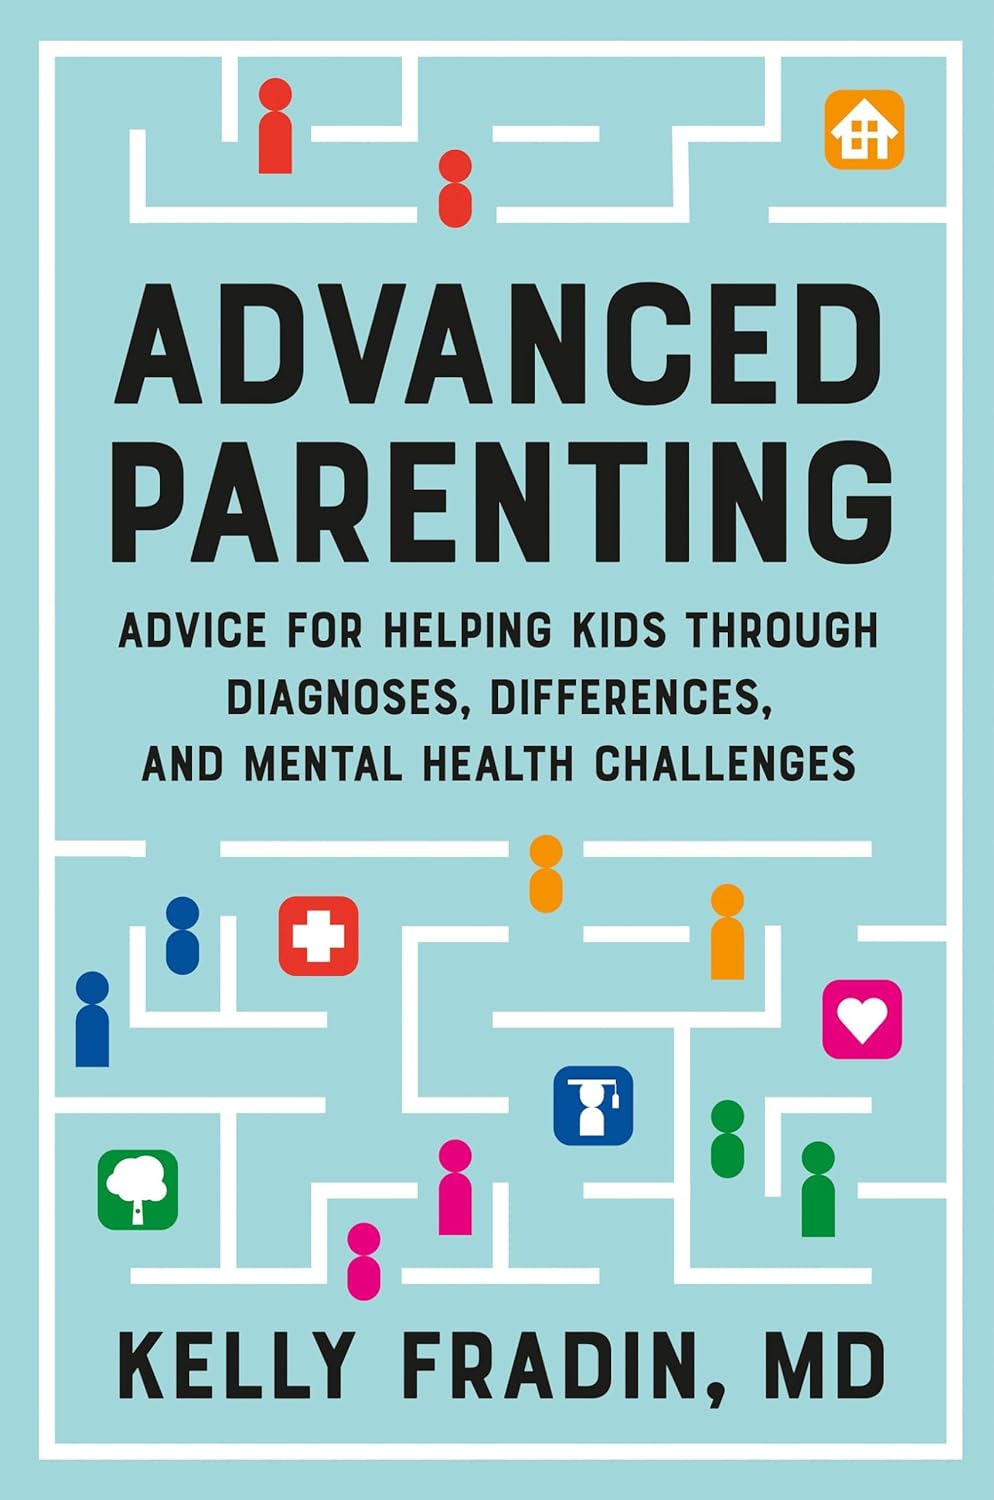 Advanced Parenting: Advice for Helping Kids Through Diagnoses, Differences, and Mental Health Challenges.